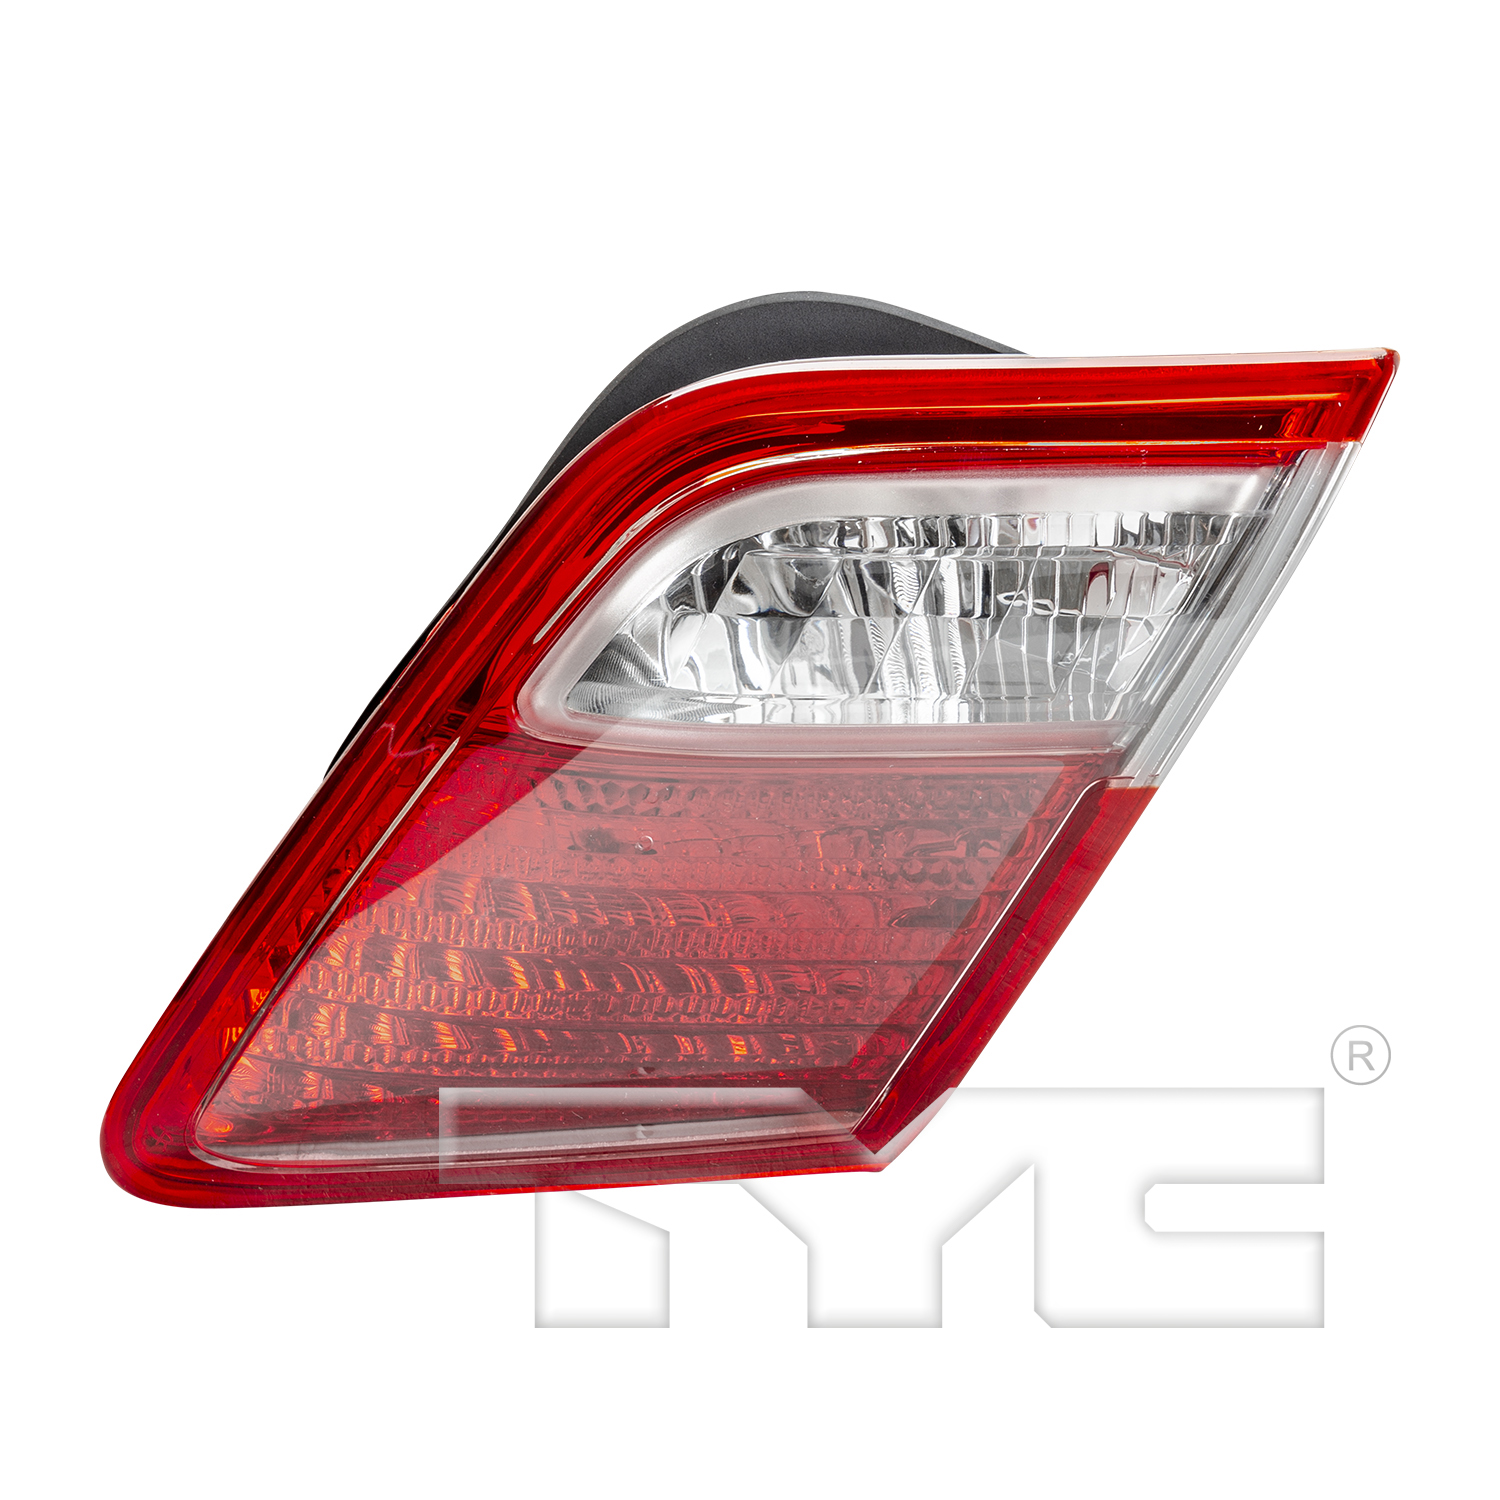 Aftermarket TAILLIGHTS for TOYOTA - CAMRY, CAMRY,07-09,RT Taillamp lens/housing